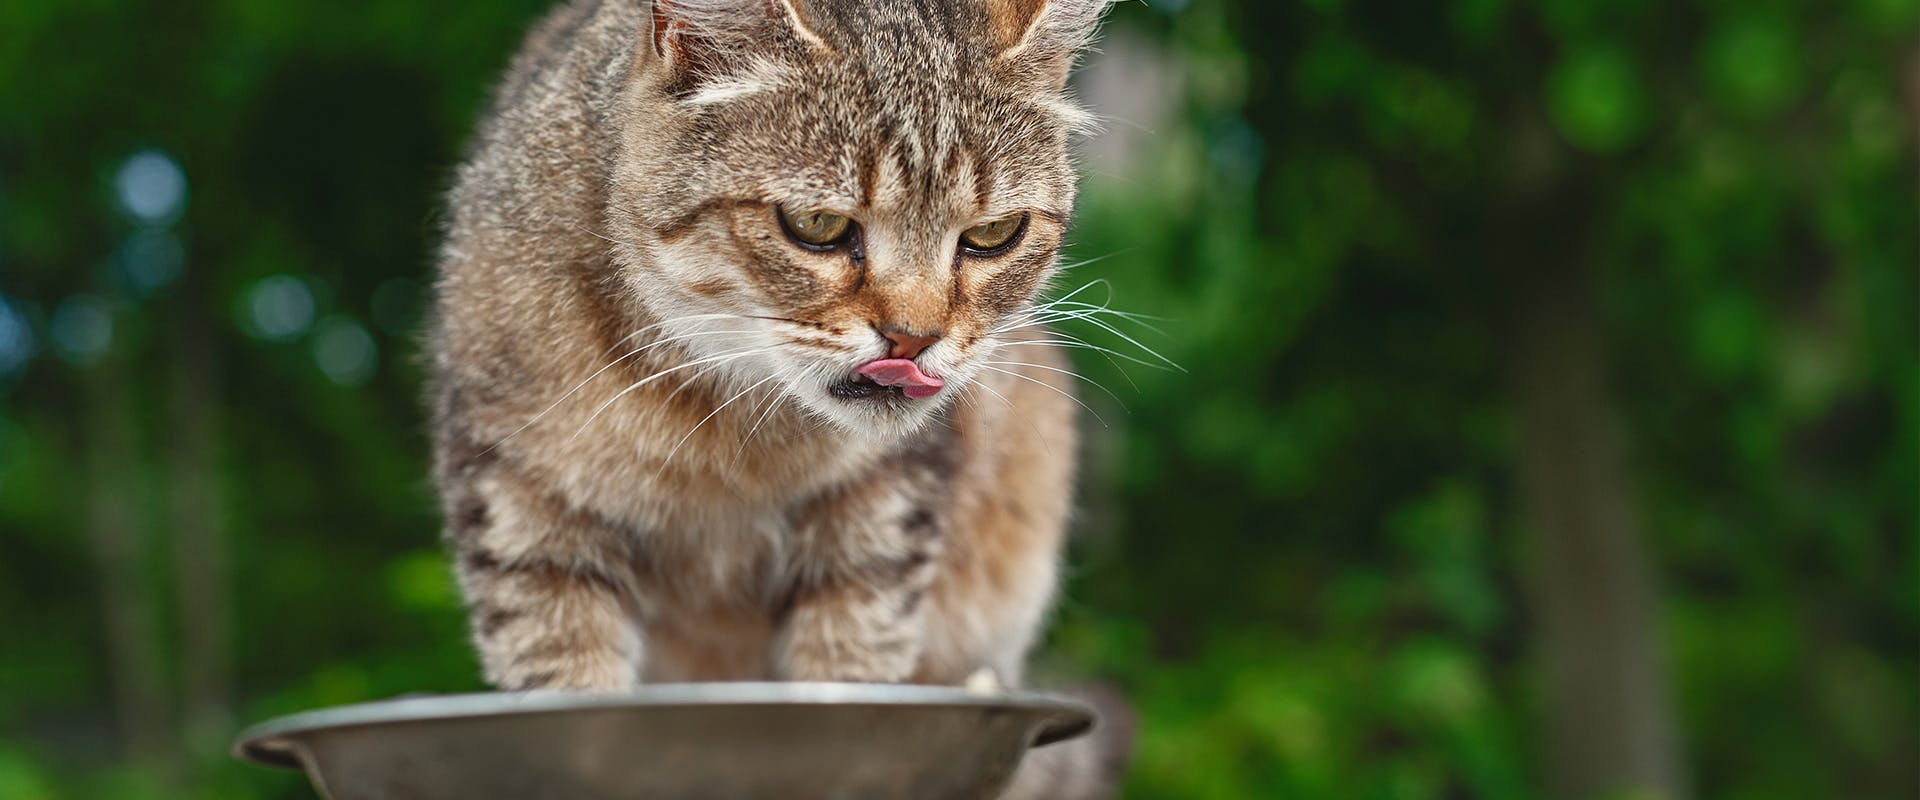 A senior cat eating from a bowl